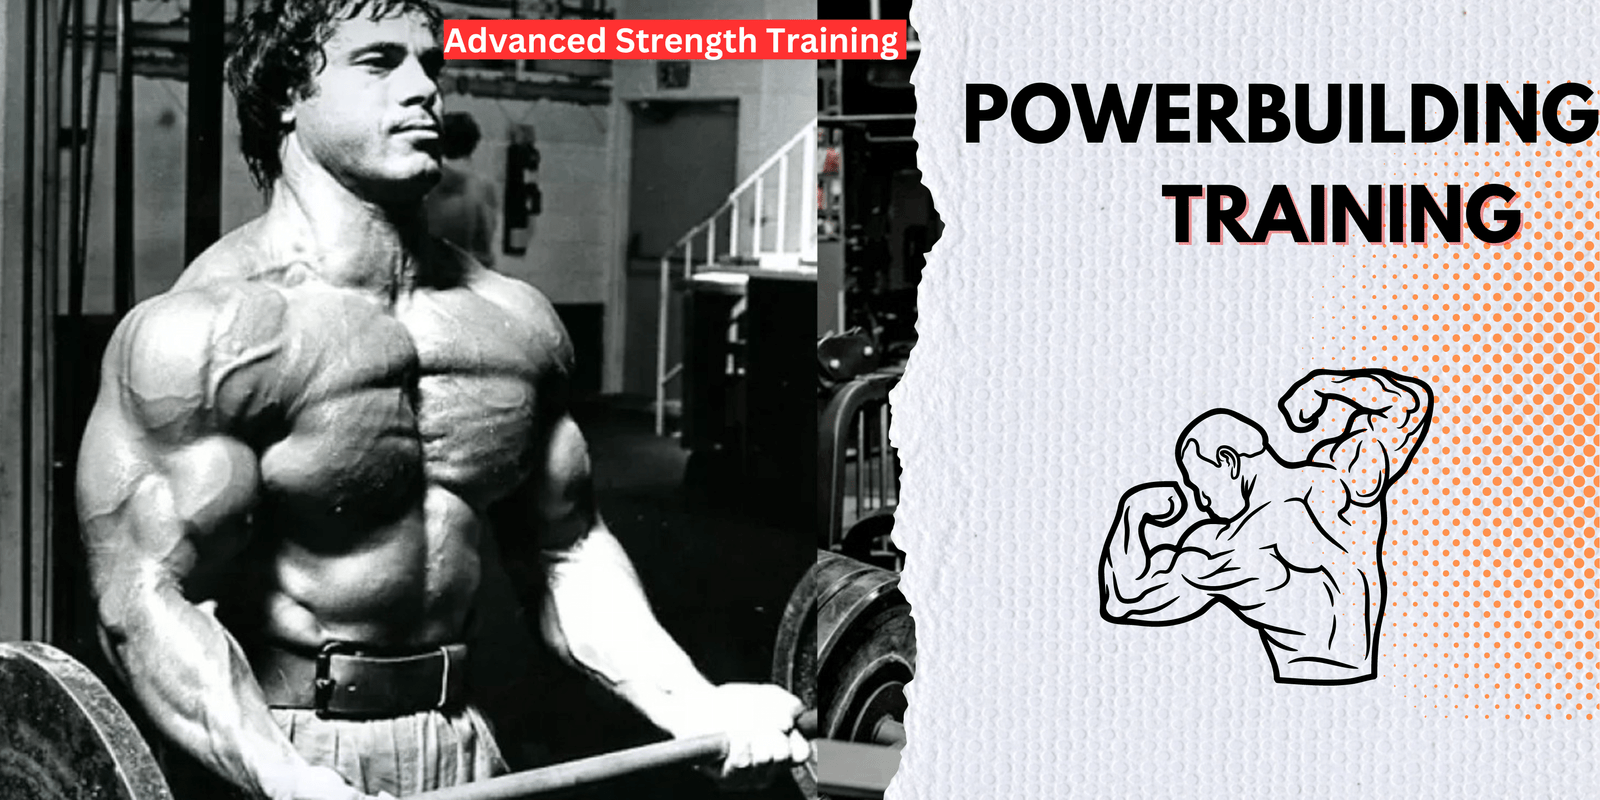 Powerbuilding Training Build Strength and Muscle Mass